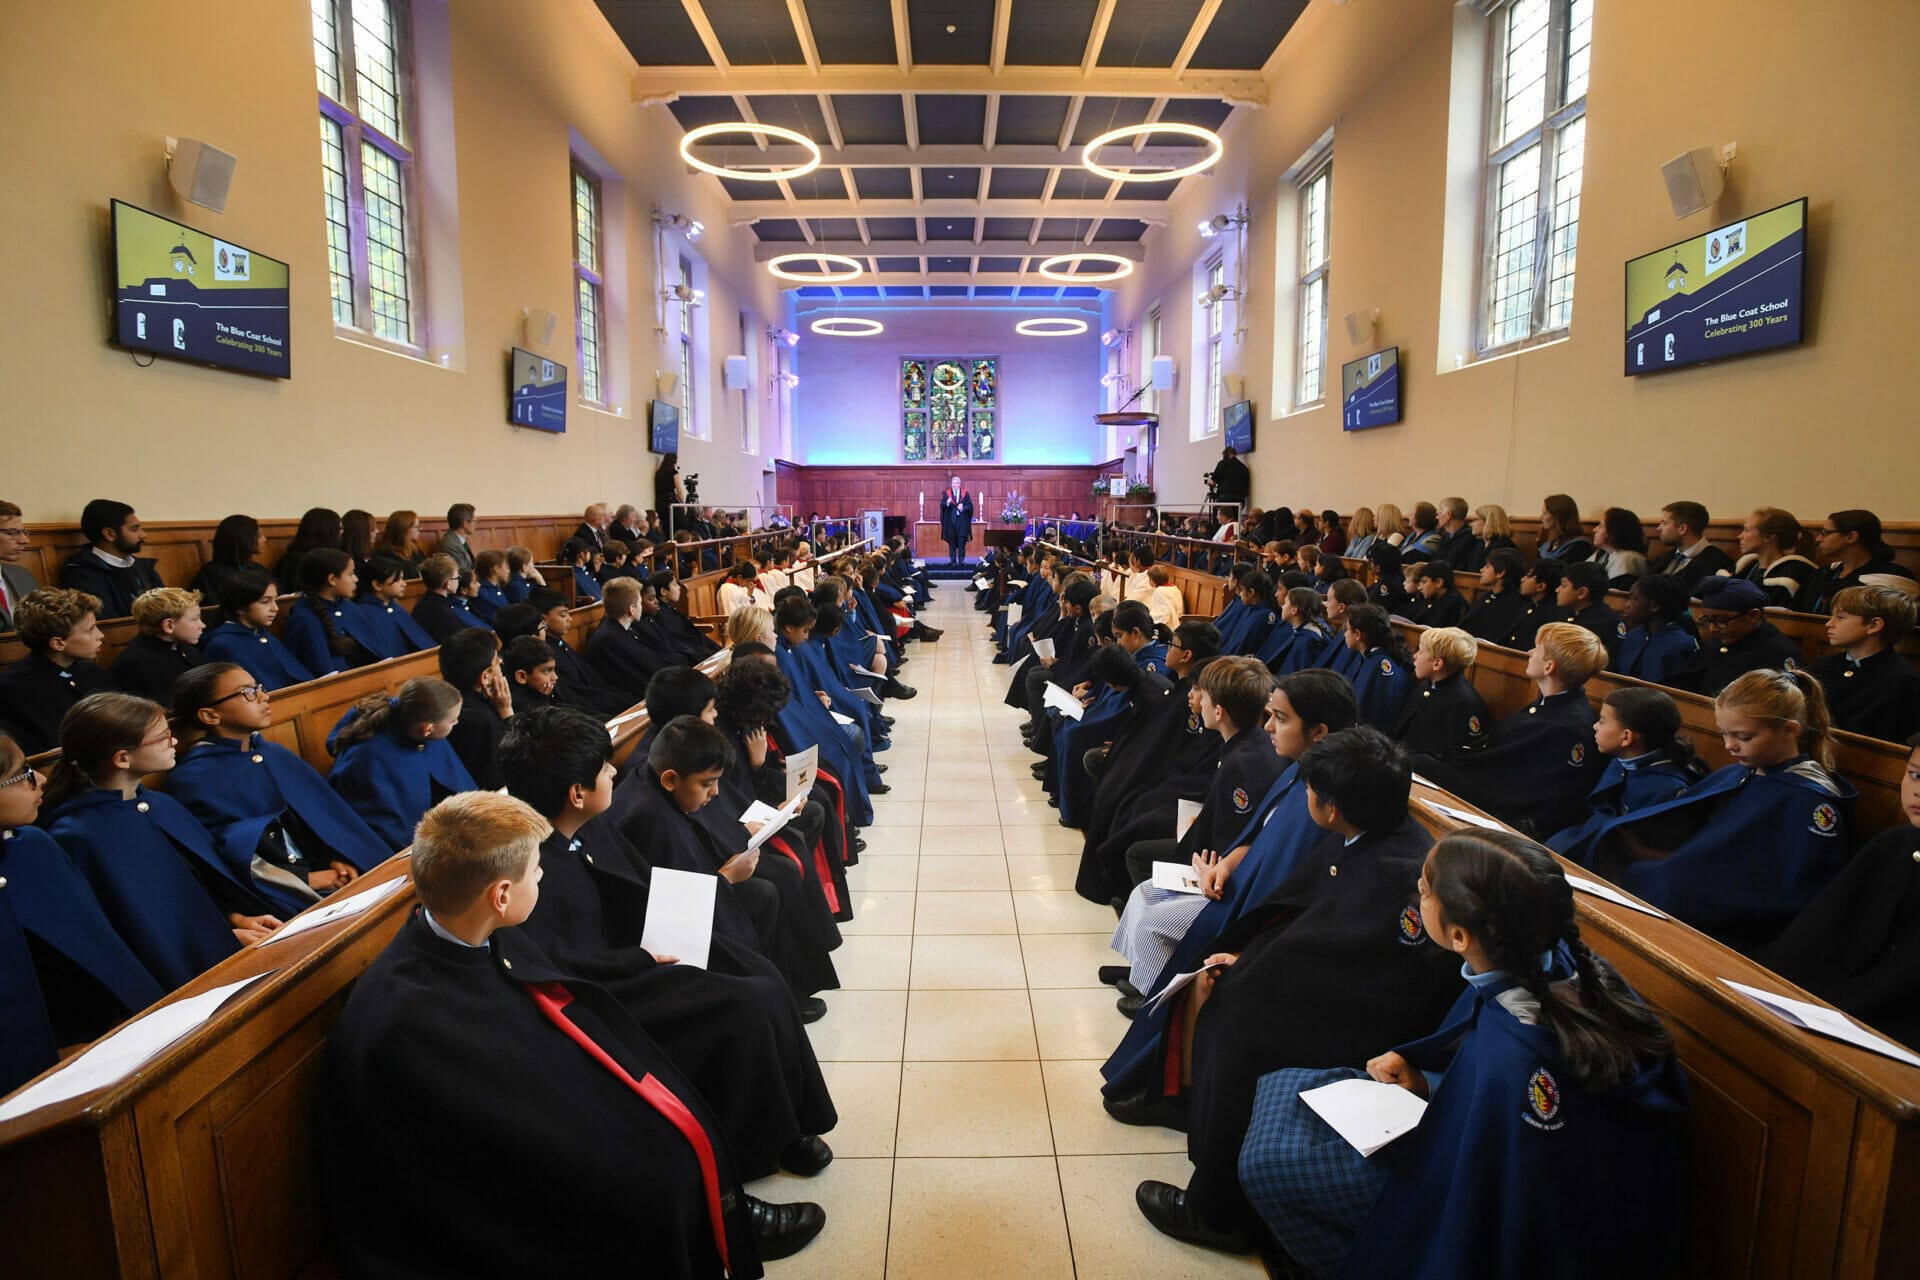 Pupils wear their Best Blues in the Chapel at The Blue Coat School.